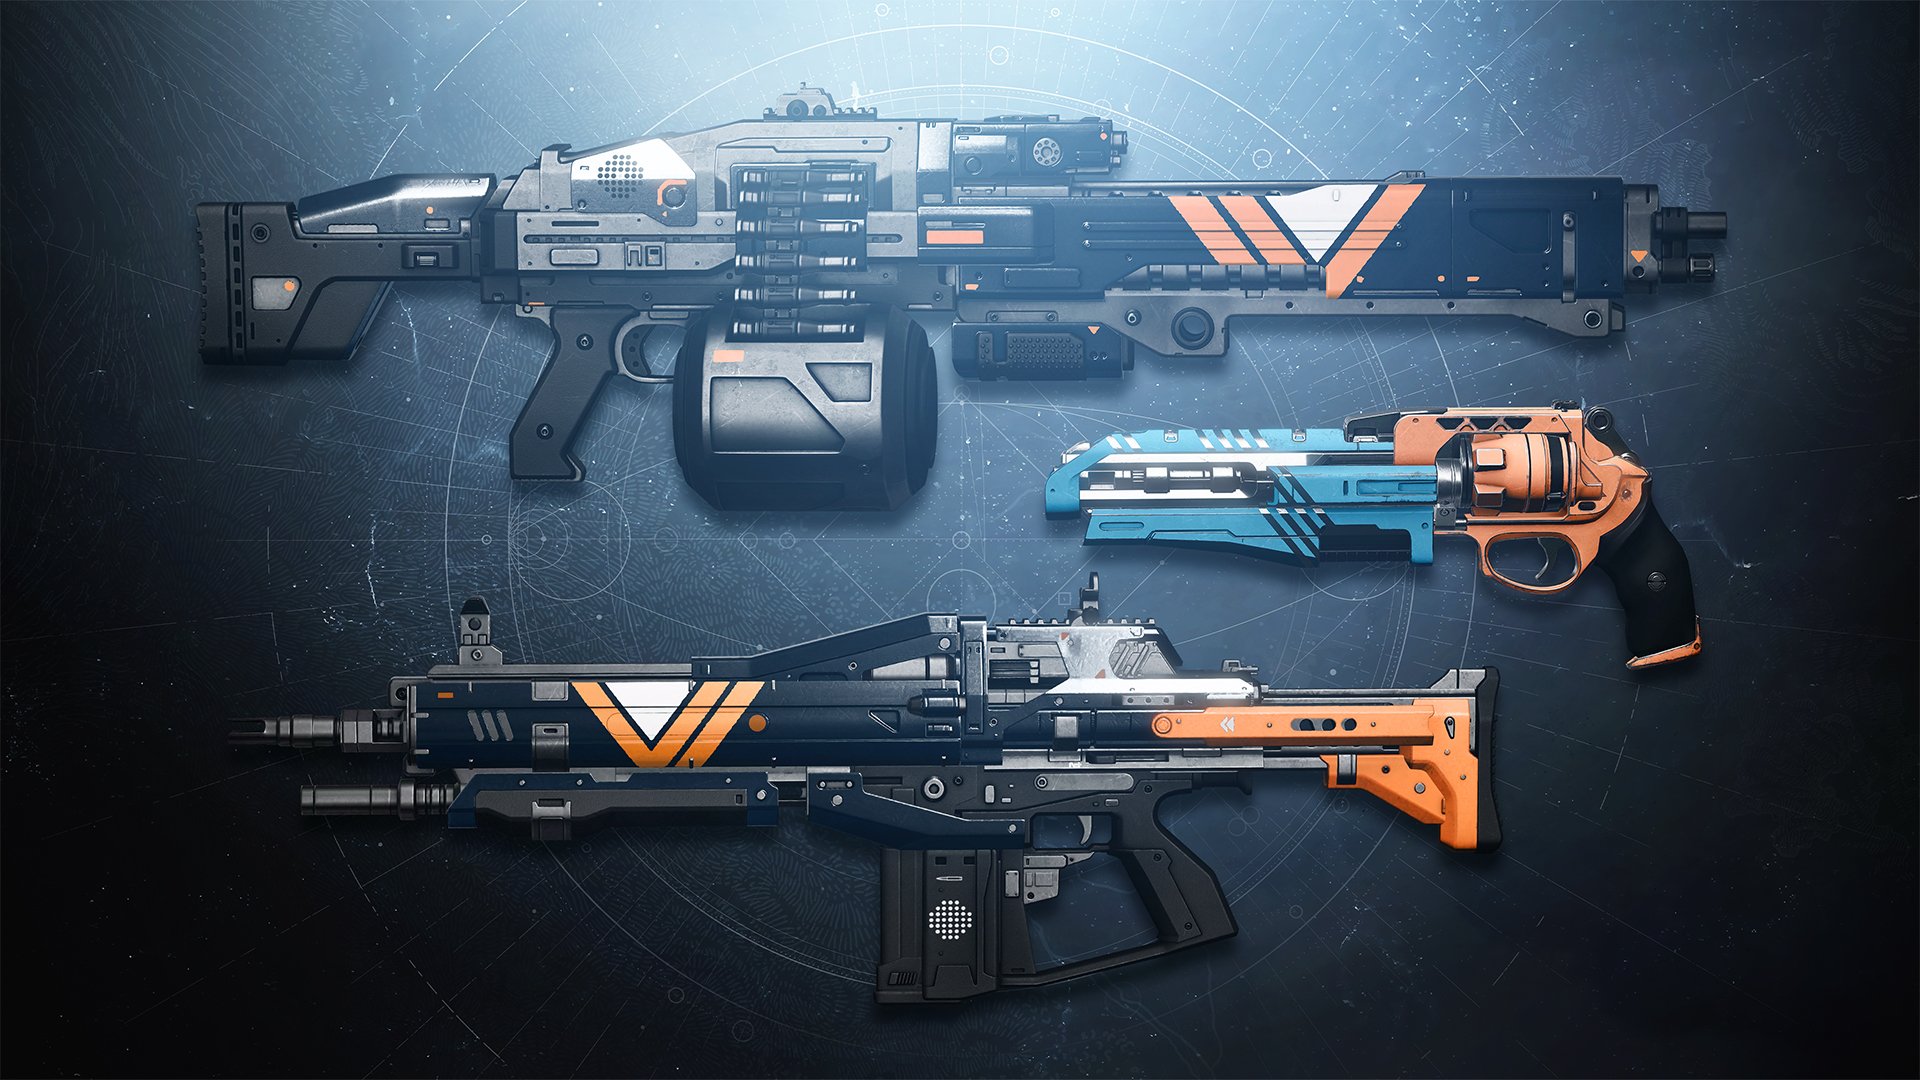 Seasonal Schedule and Featured Weapons